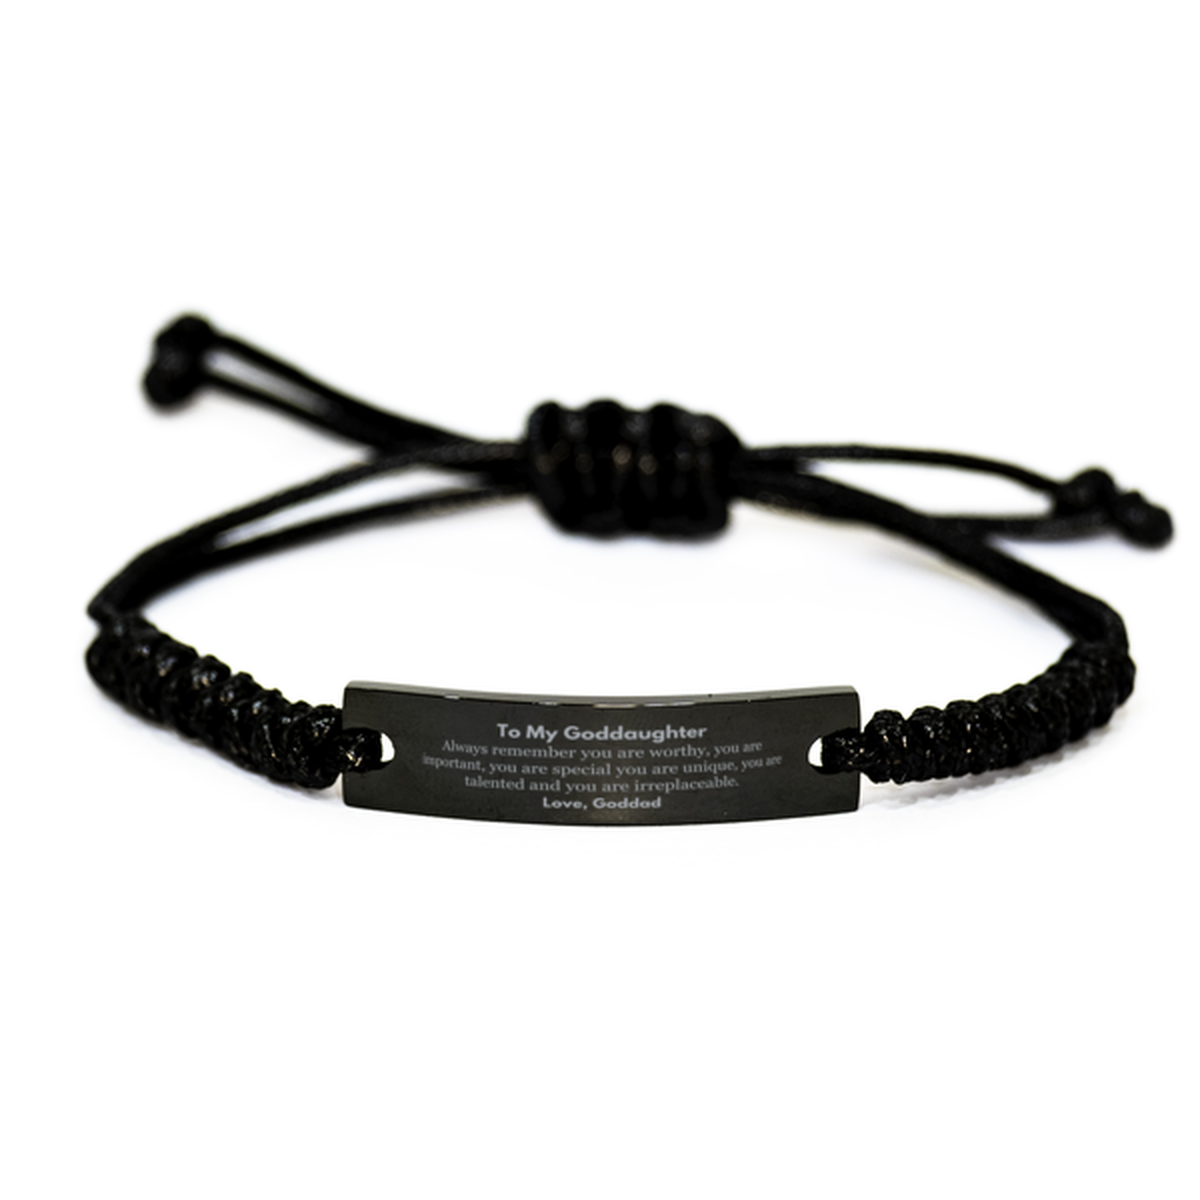 Goddaughter Birthday Gifts from Goddad, Inspirational Black Rope Bracelet for Goddaughter Christmas Graduation Gifts for Goddaughter Always remember you are worthy, you are important. Love, Goddad